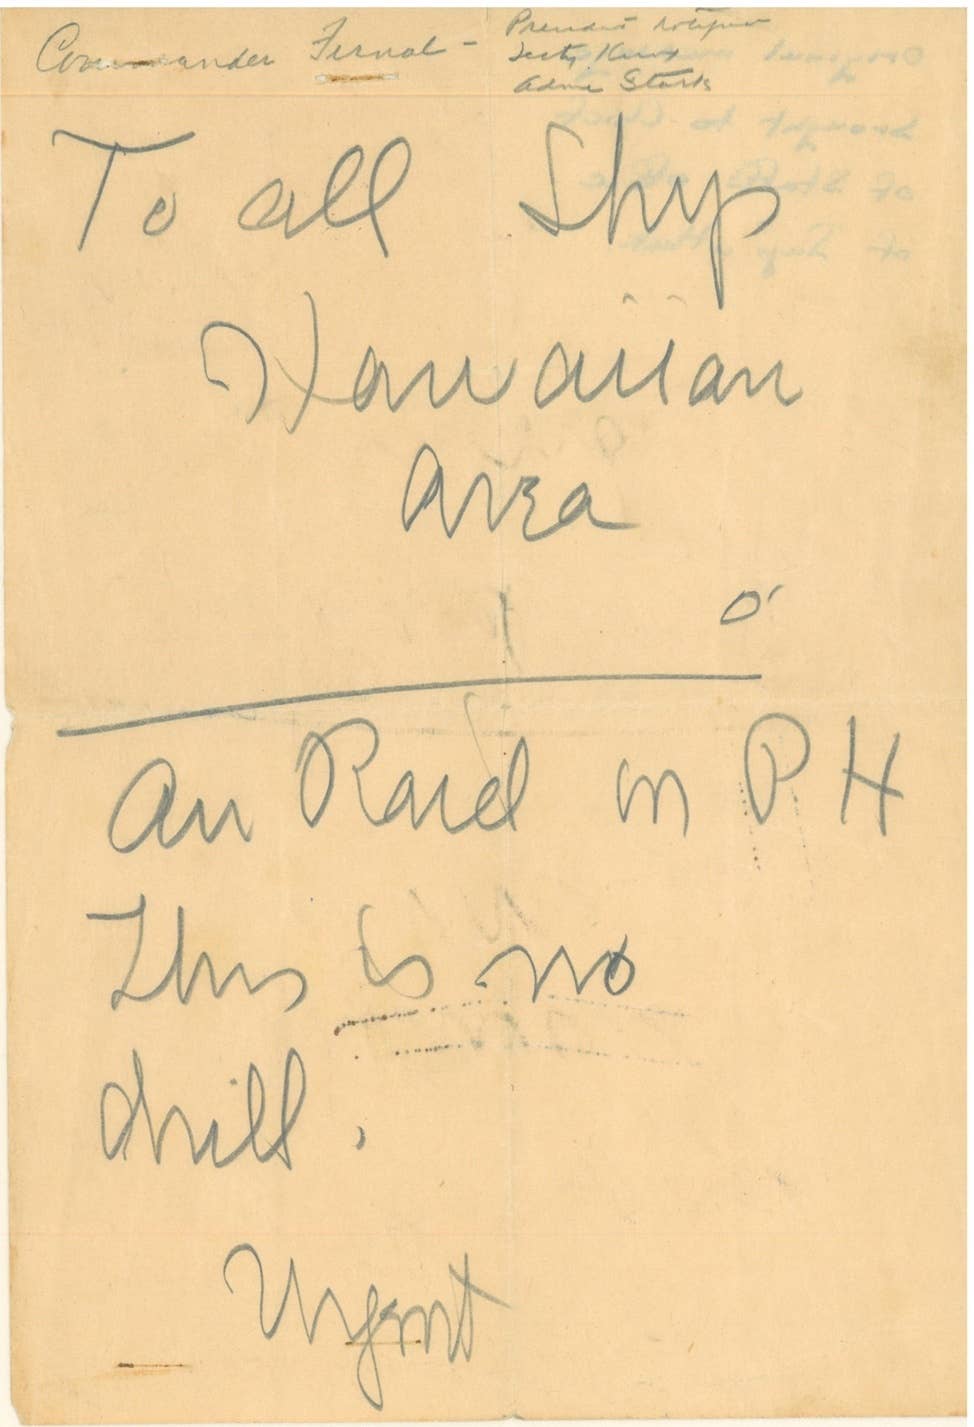 A digital scan of the actual note given to Chief of Staff of the Army Gen. George C. Marshall. (U.S. Army War College)